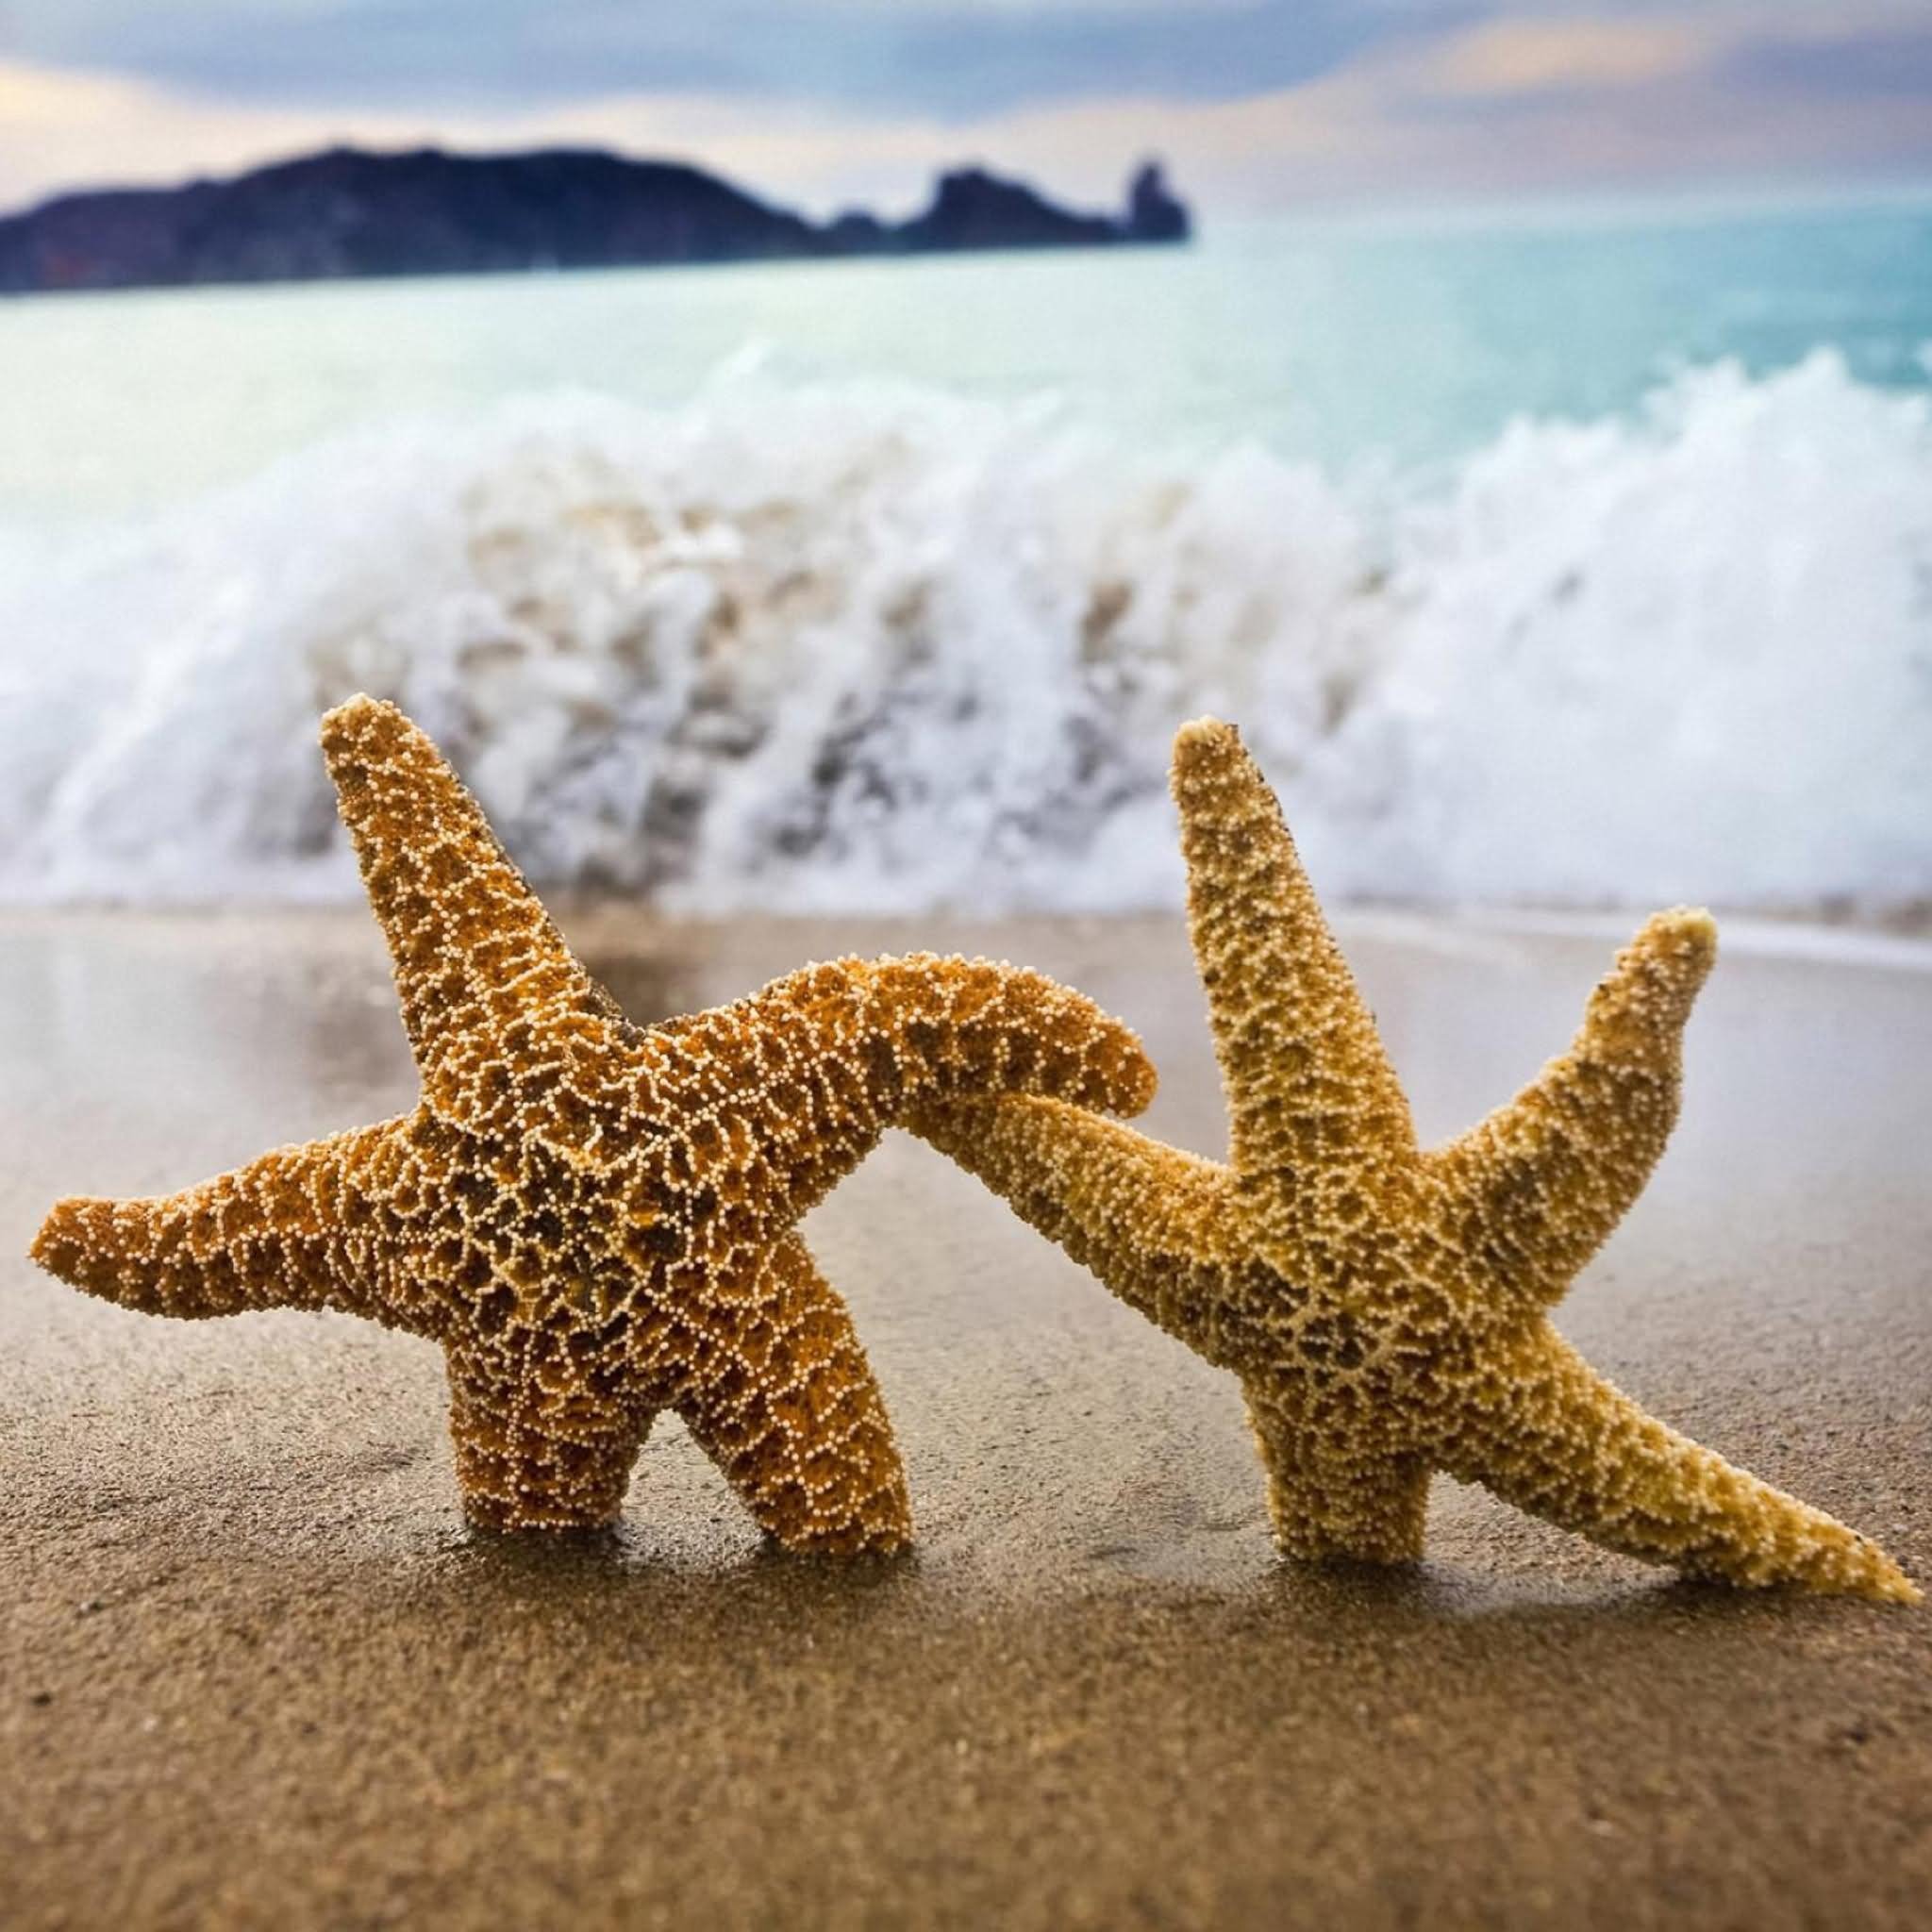 Couple Star Fish On Beach Funny Picture